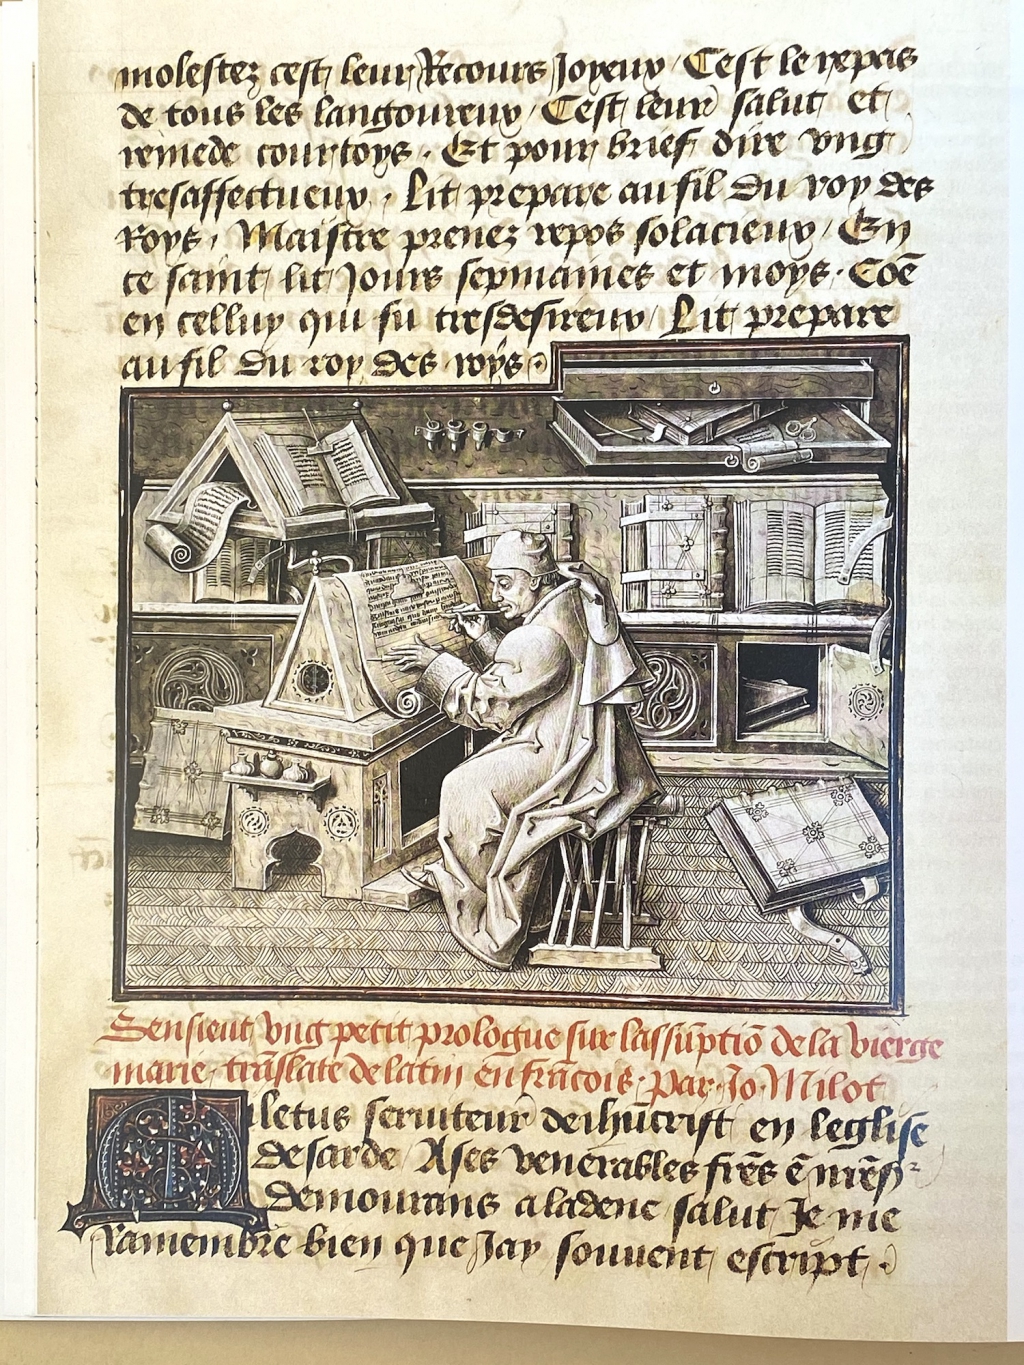 Detail of grisaille style painting by Jean Le Tavernier of Jean Miélot writing in his scriptorium, probably in the ducal library, from Miracles de Notre Dame, Bibliothèque nationale de France